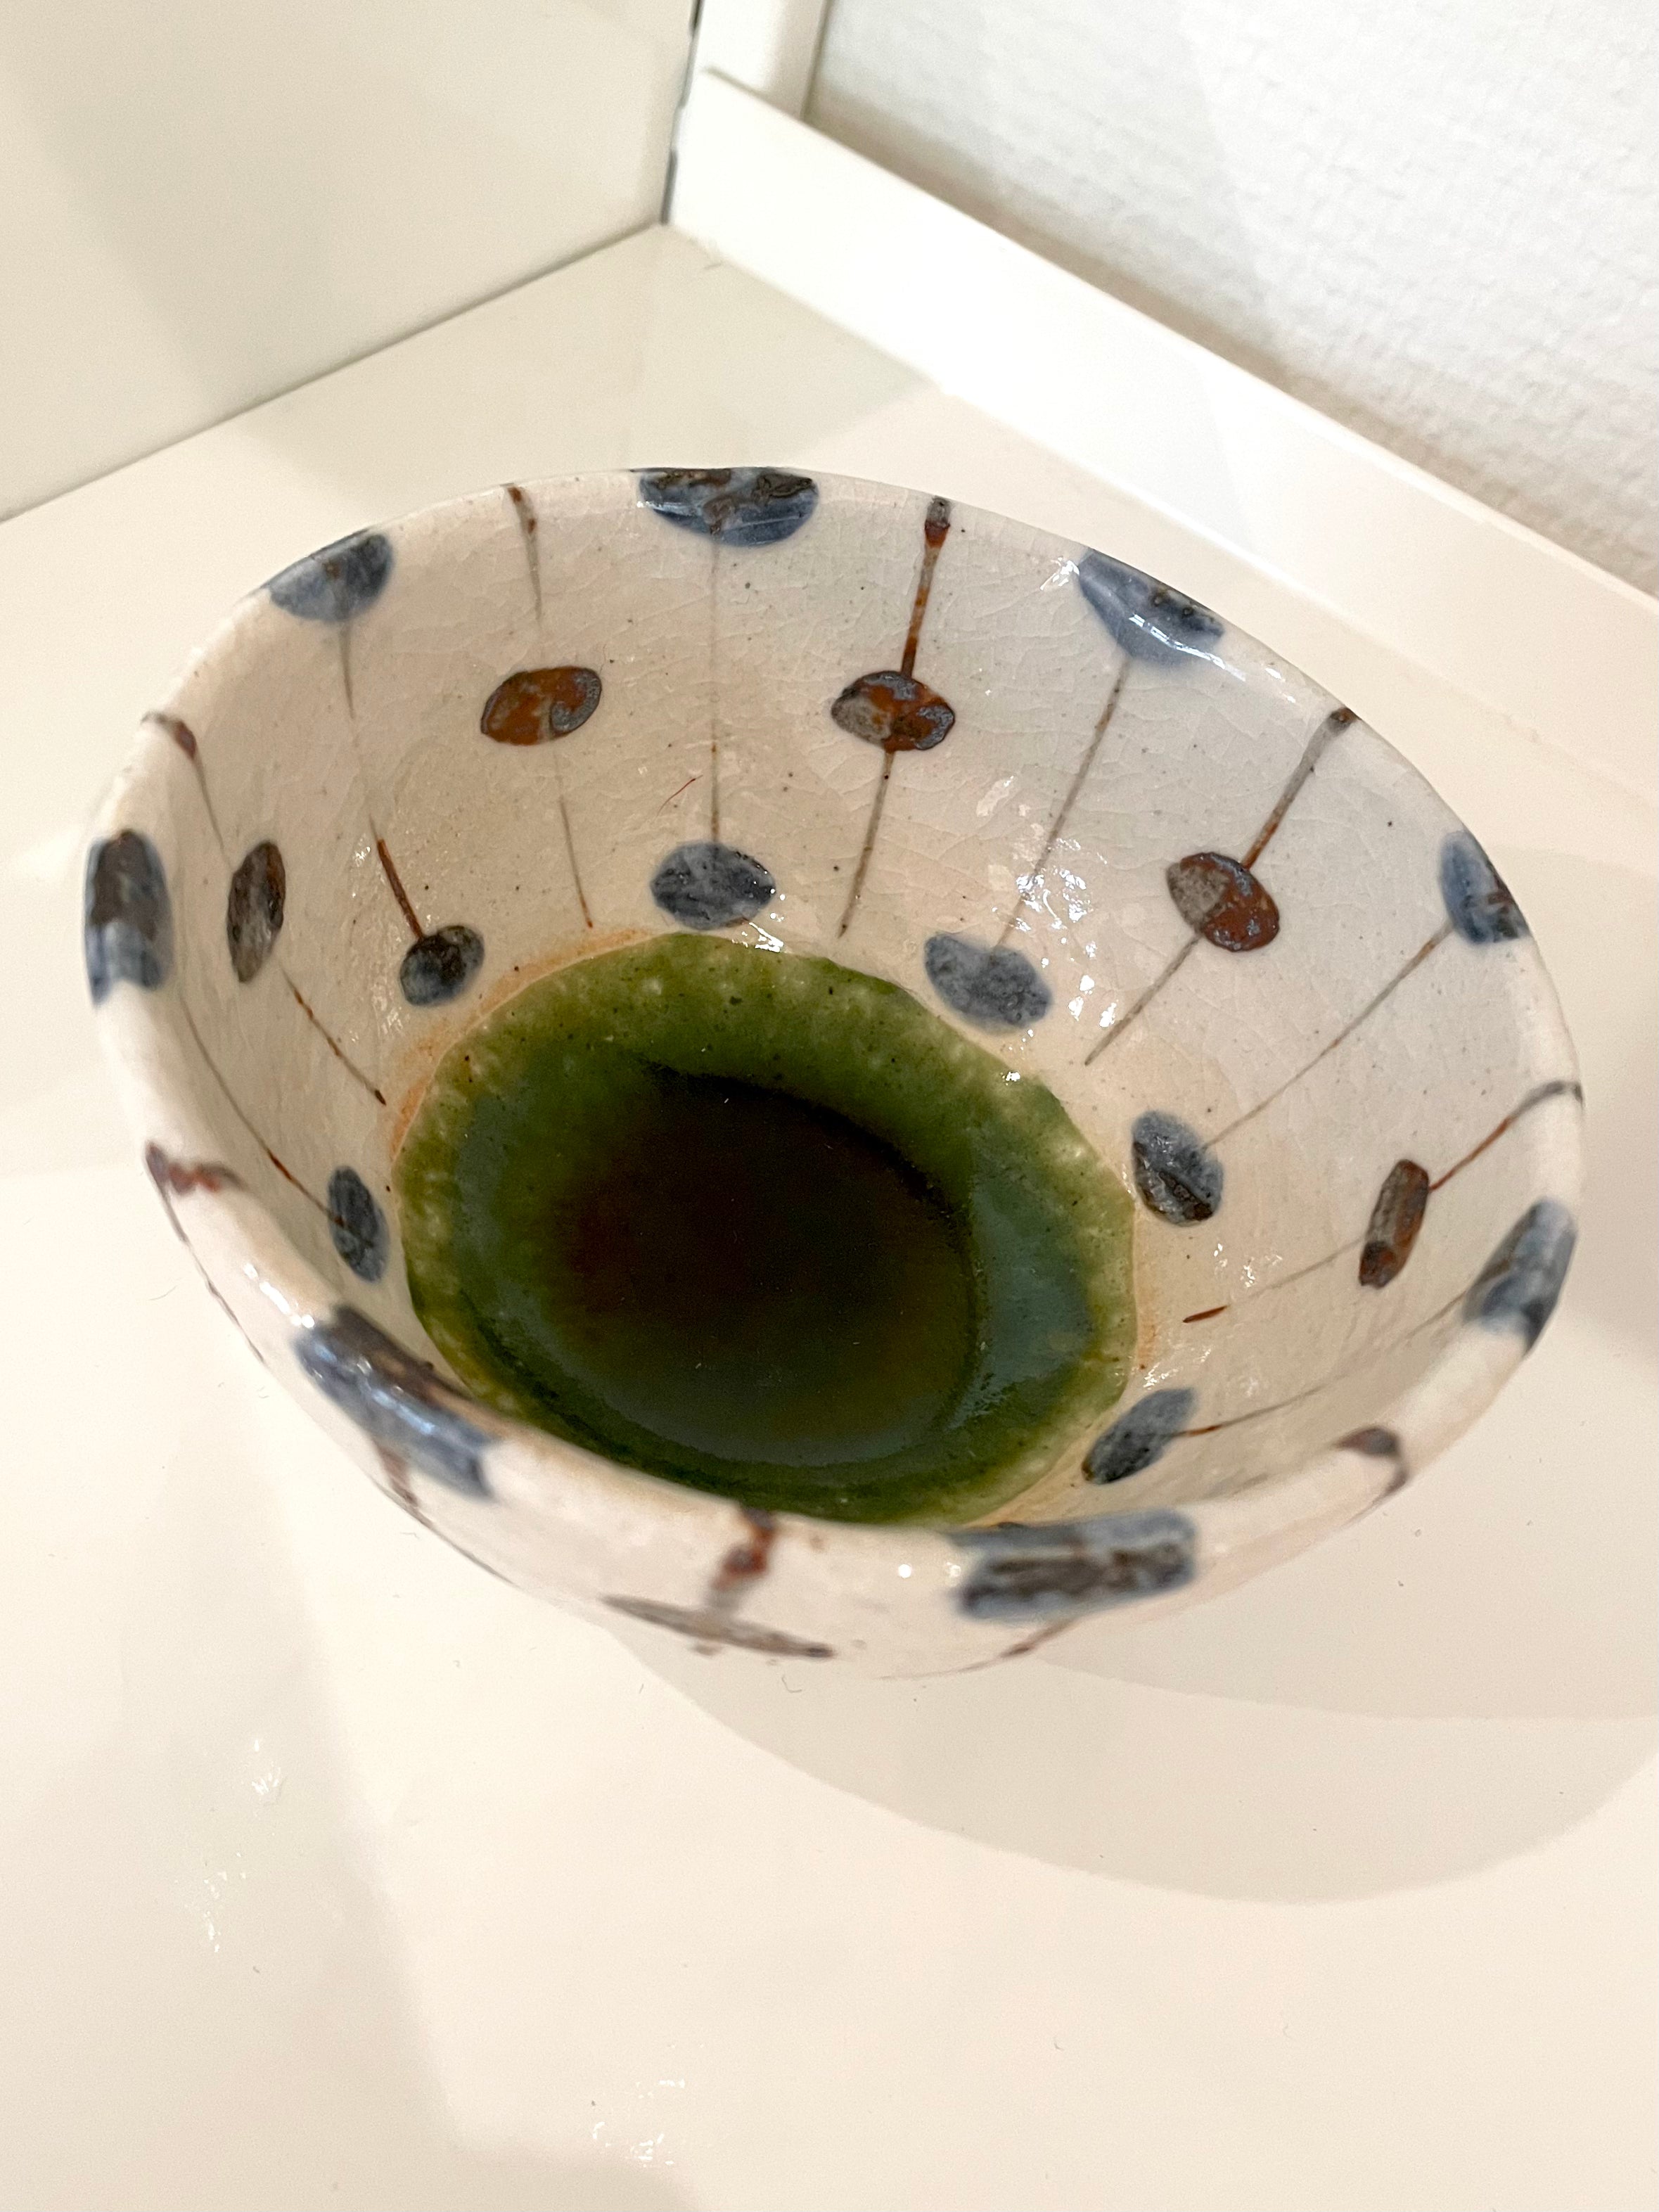 Handmade Japanese bowl with blue and brown dots